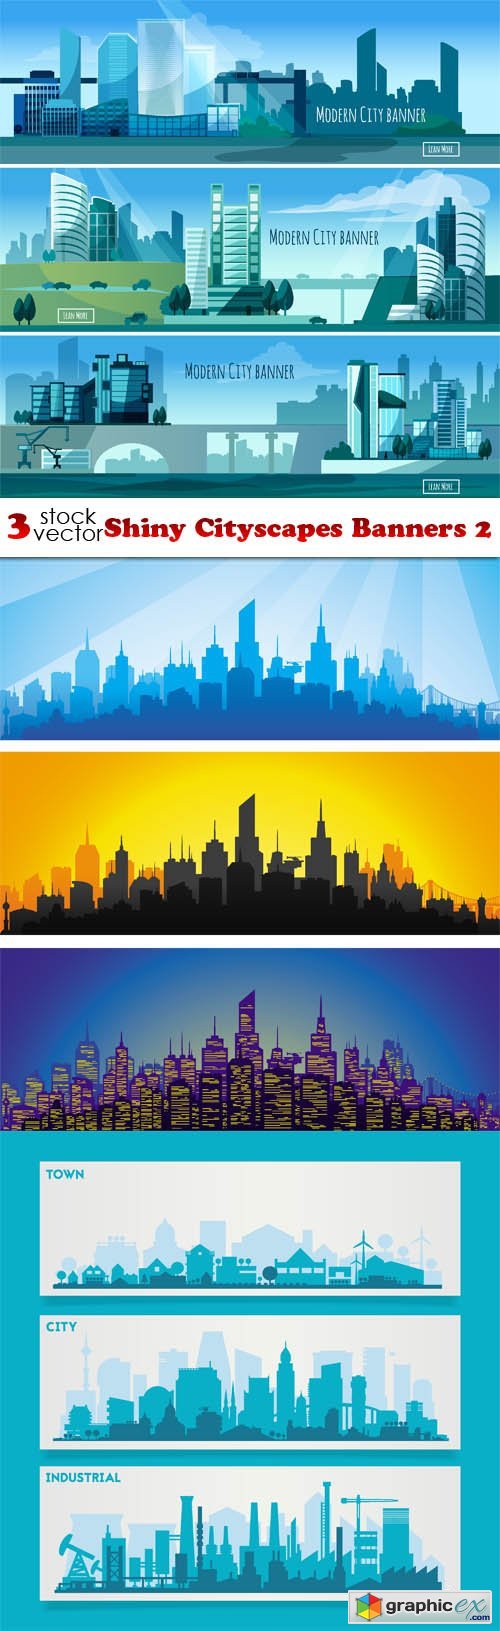 Shiny Cityscapes Banners 2